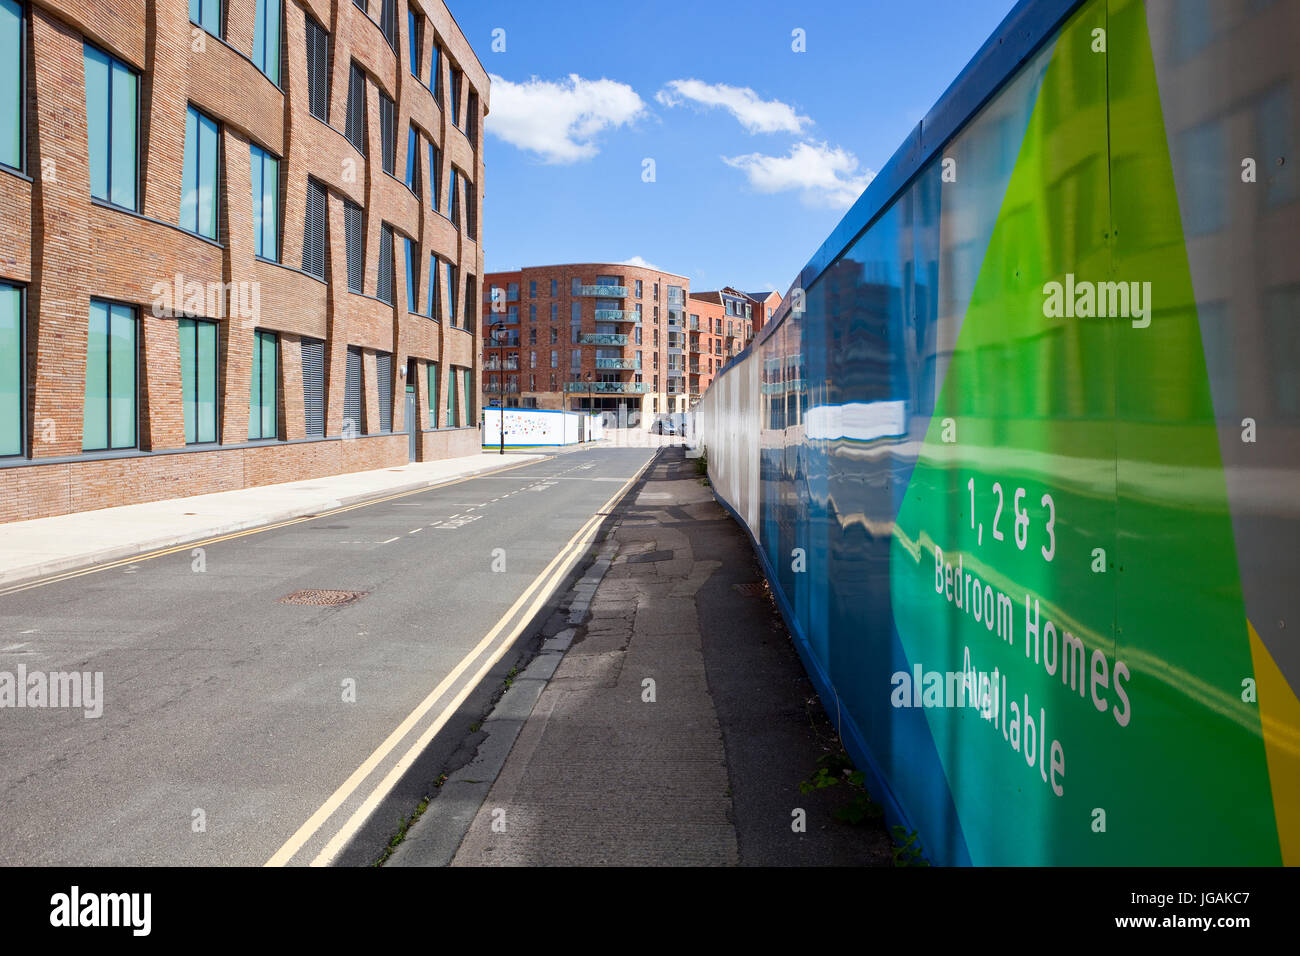 Colorful hoardings and new apartment buildings at Hungate in the historic city of York. Stock Photo